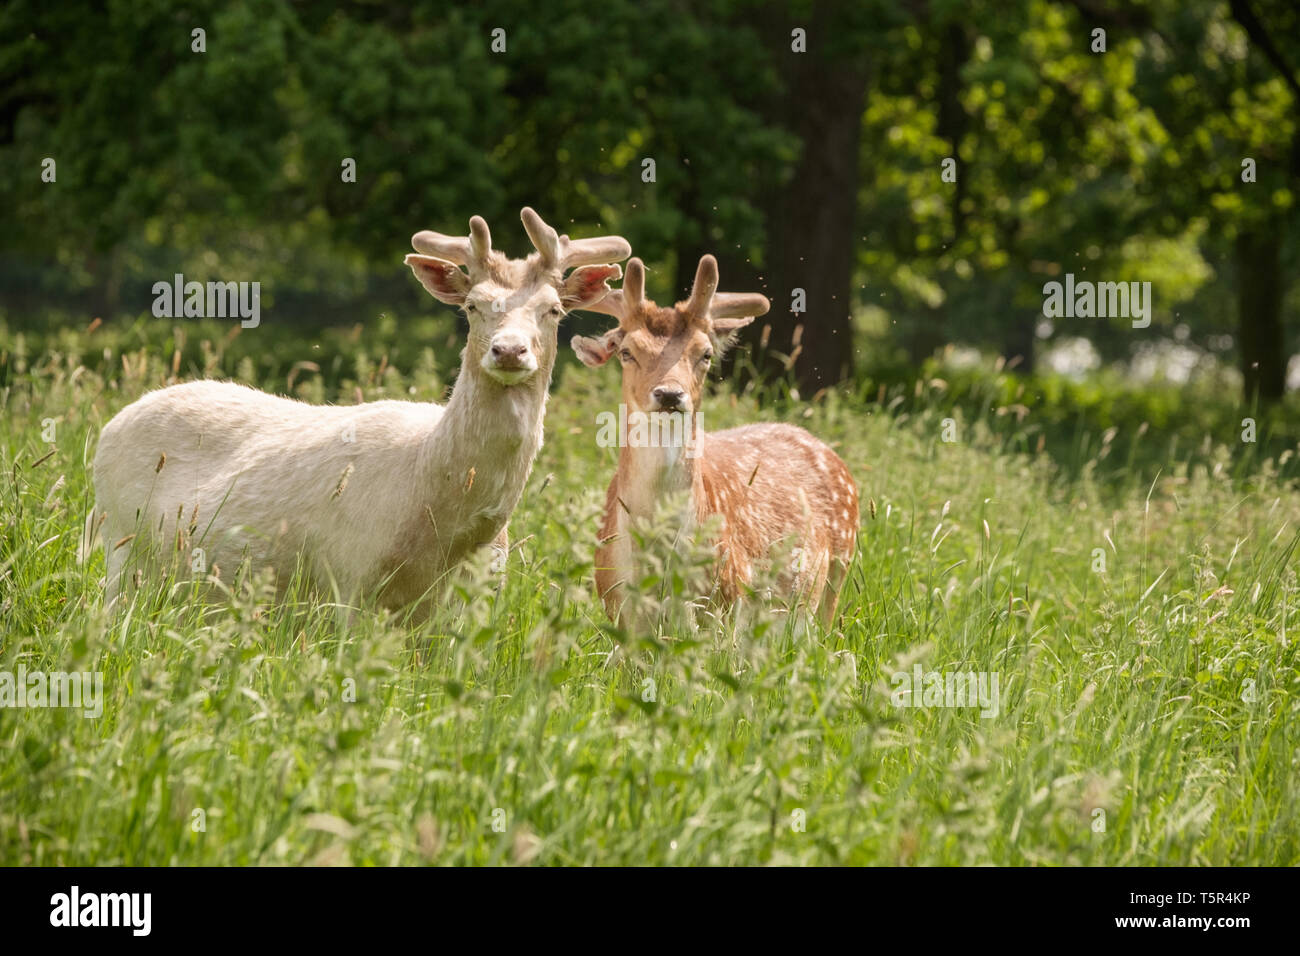 Deer Meadow en anglais Country Park, Warwickshire, Angleterre Banque D'Images